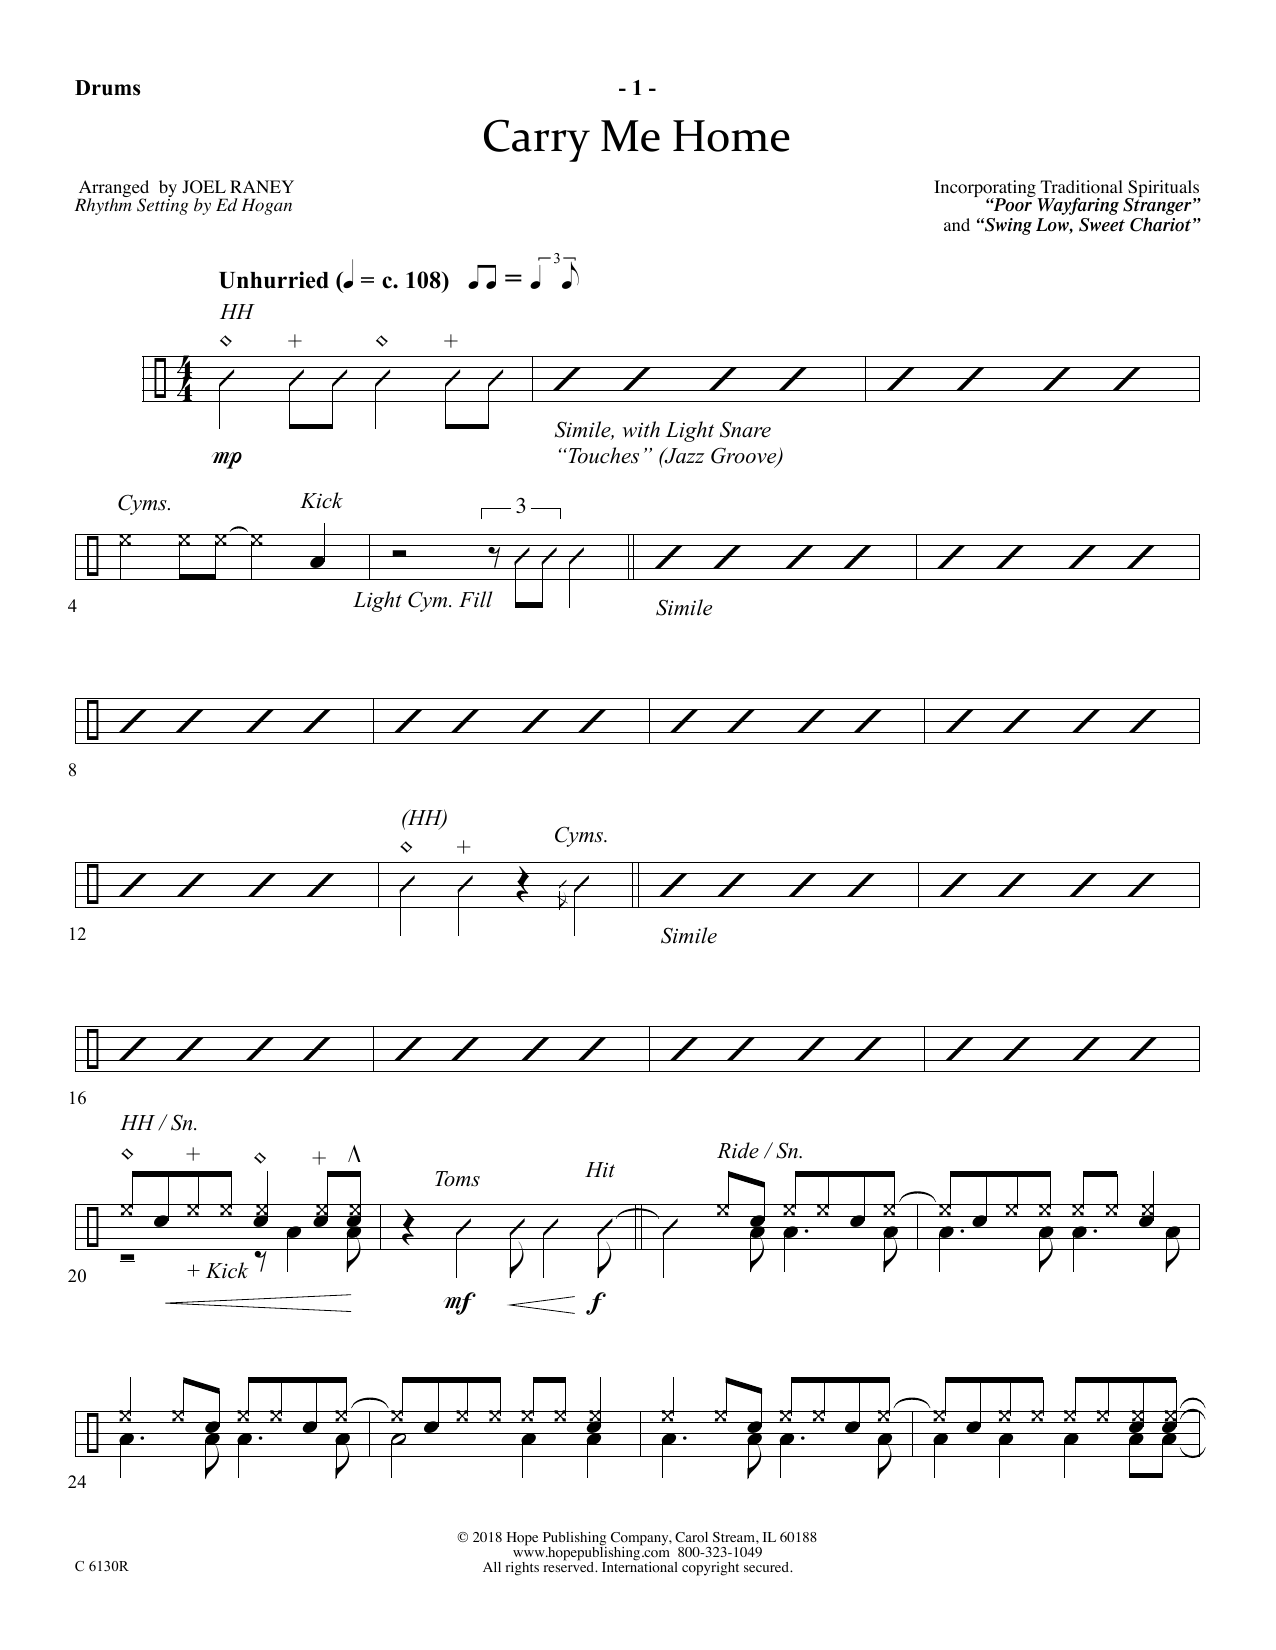 Download Joel Raney Carry Me Home - Drums Sheet Music